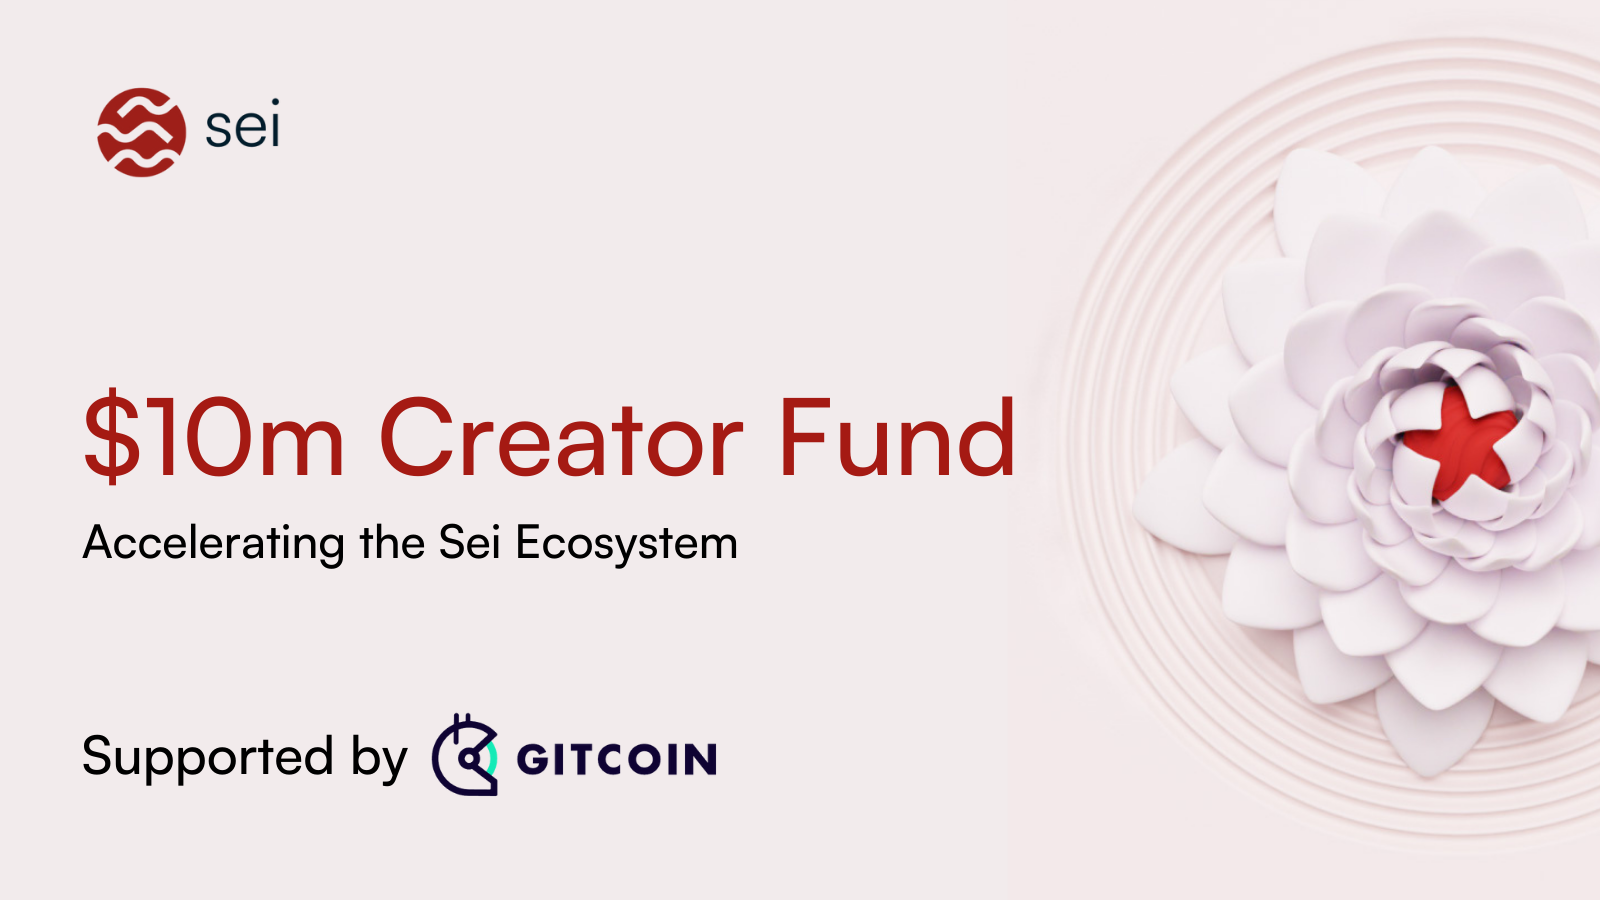 Sei Foundation partners with Gitcoin to announce $10M Creator Fund